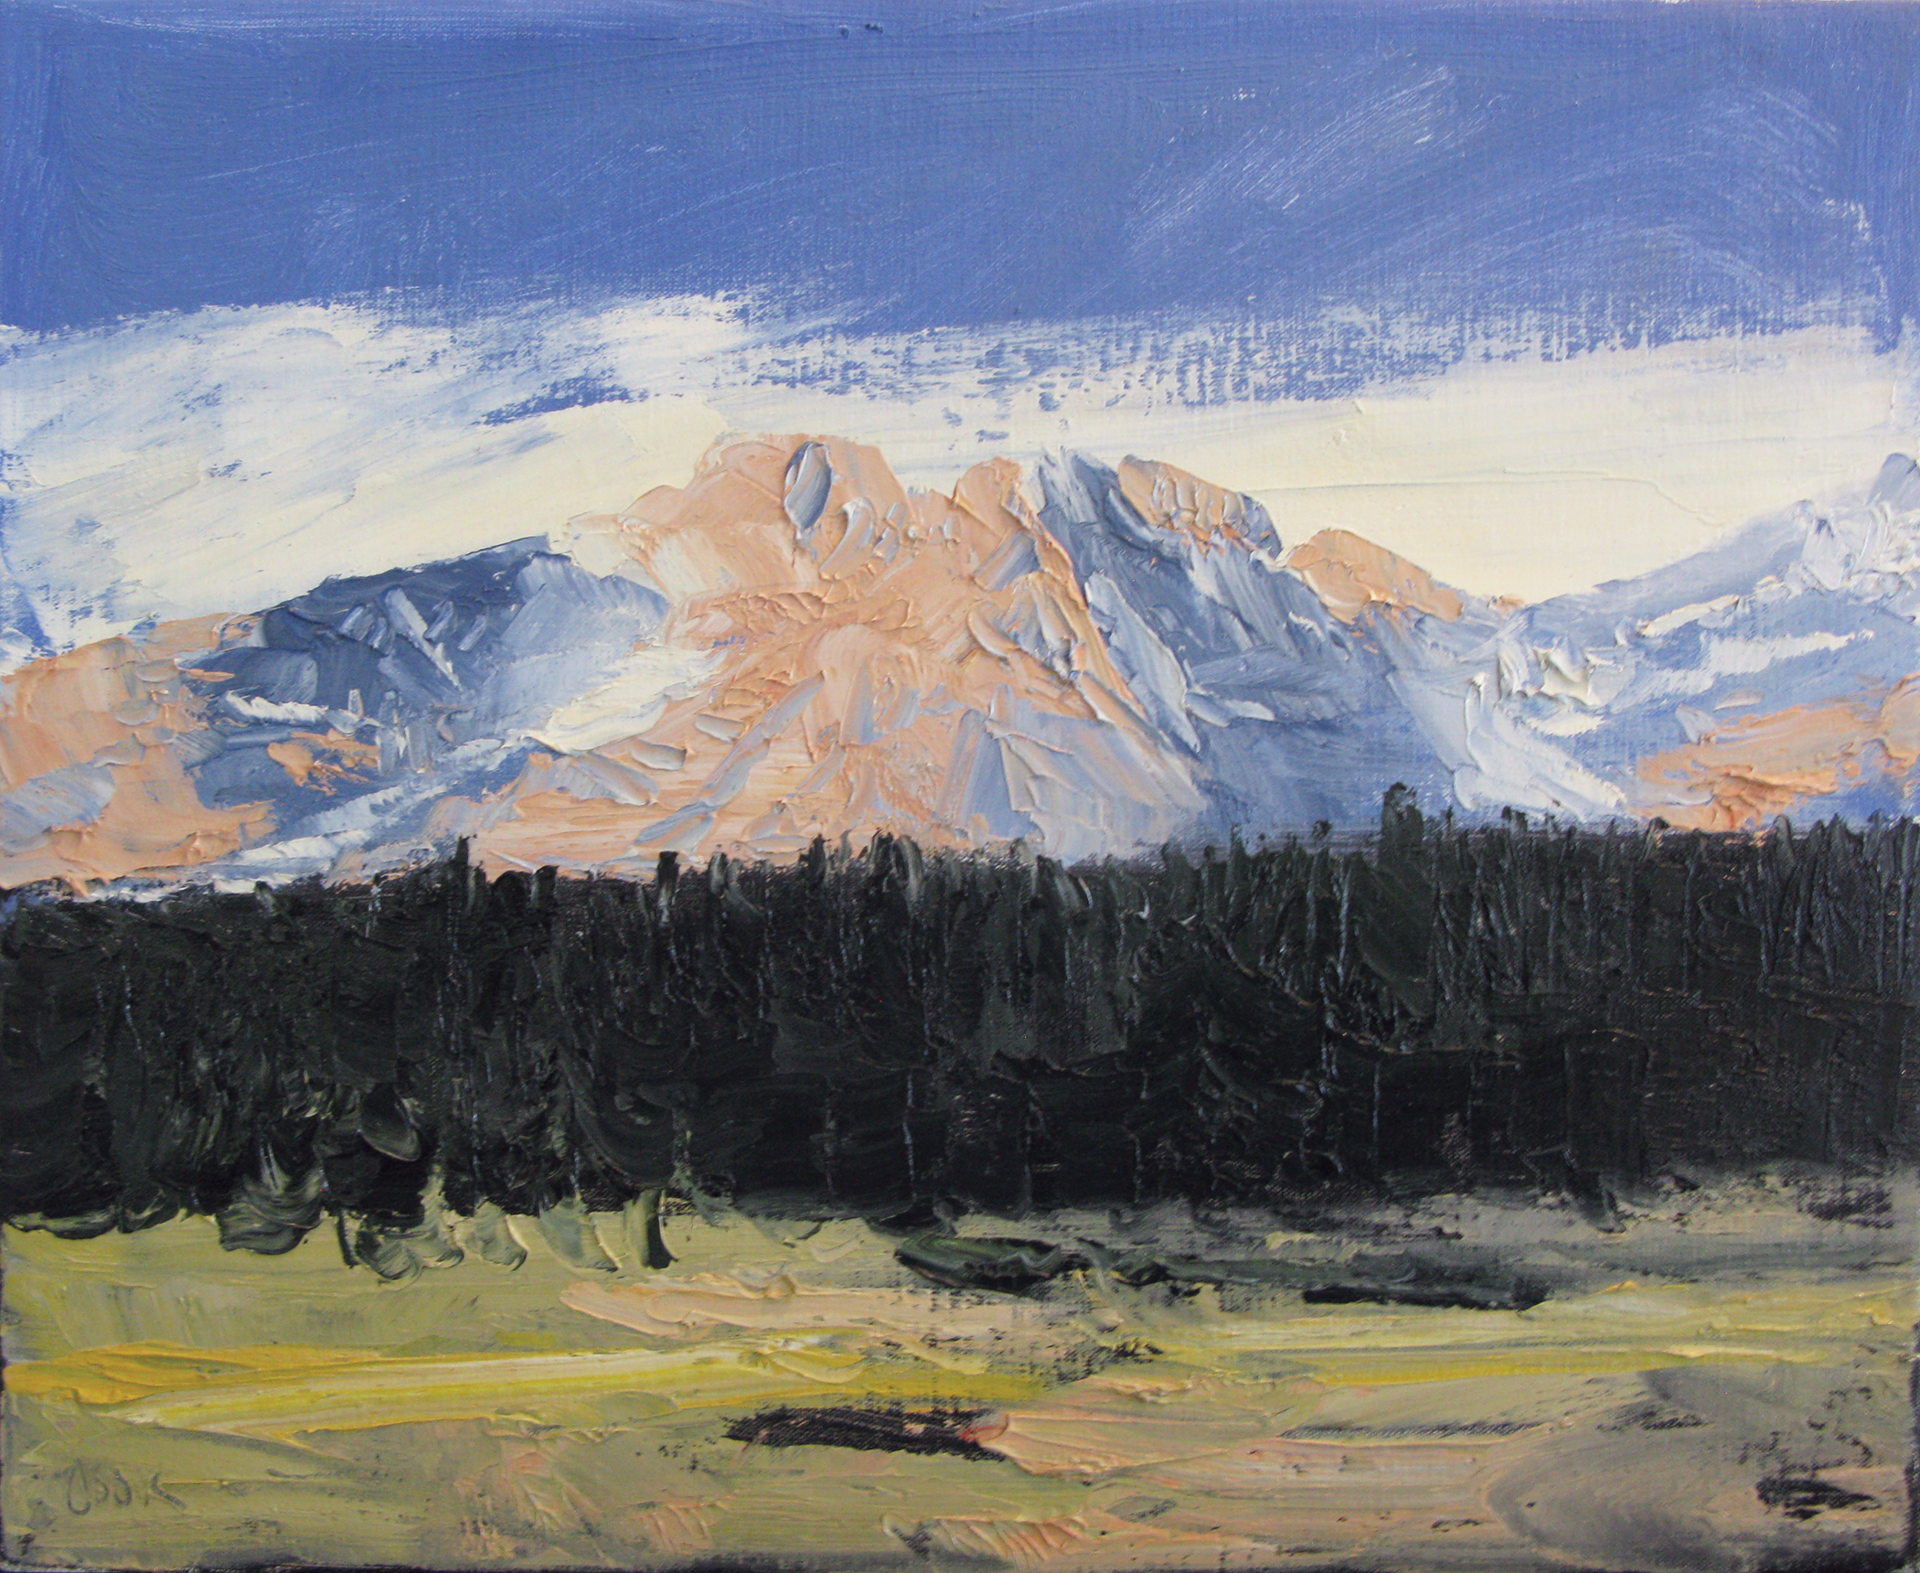 Sawtooth Study, Stanley #7 by James Cook